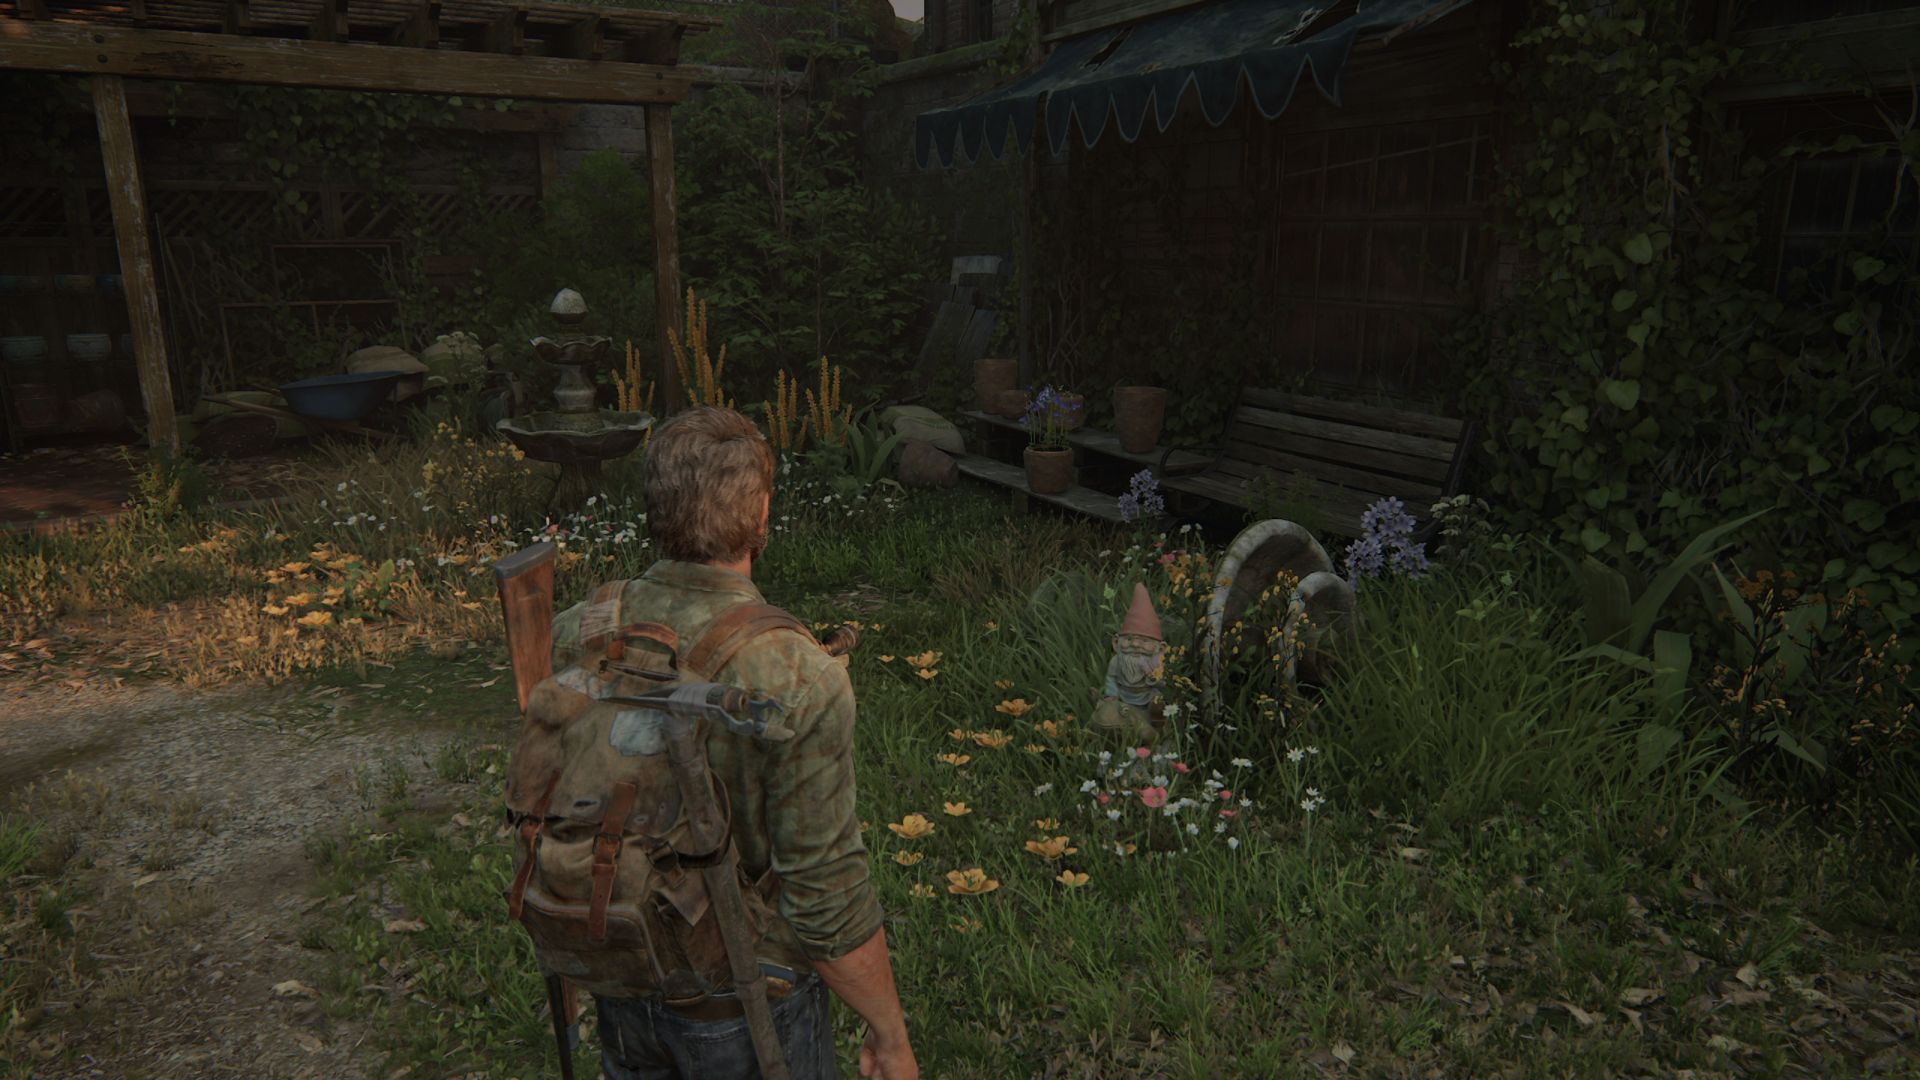 The Last of Us Part 1 Remake Bill's Town Collectible Locations: Joel can be seen looking at the collectible location